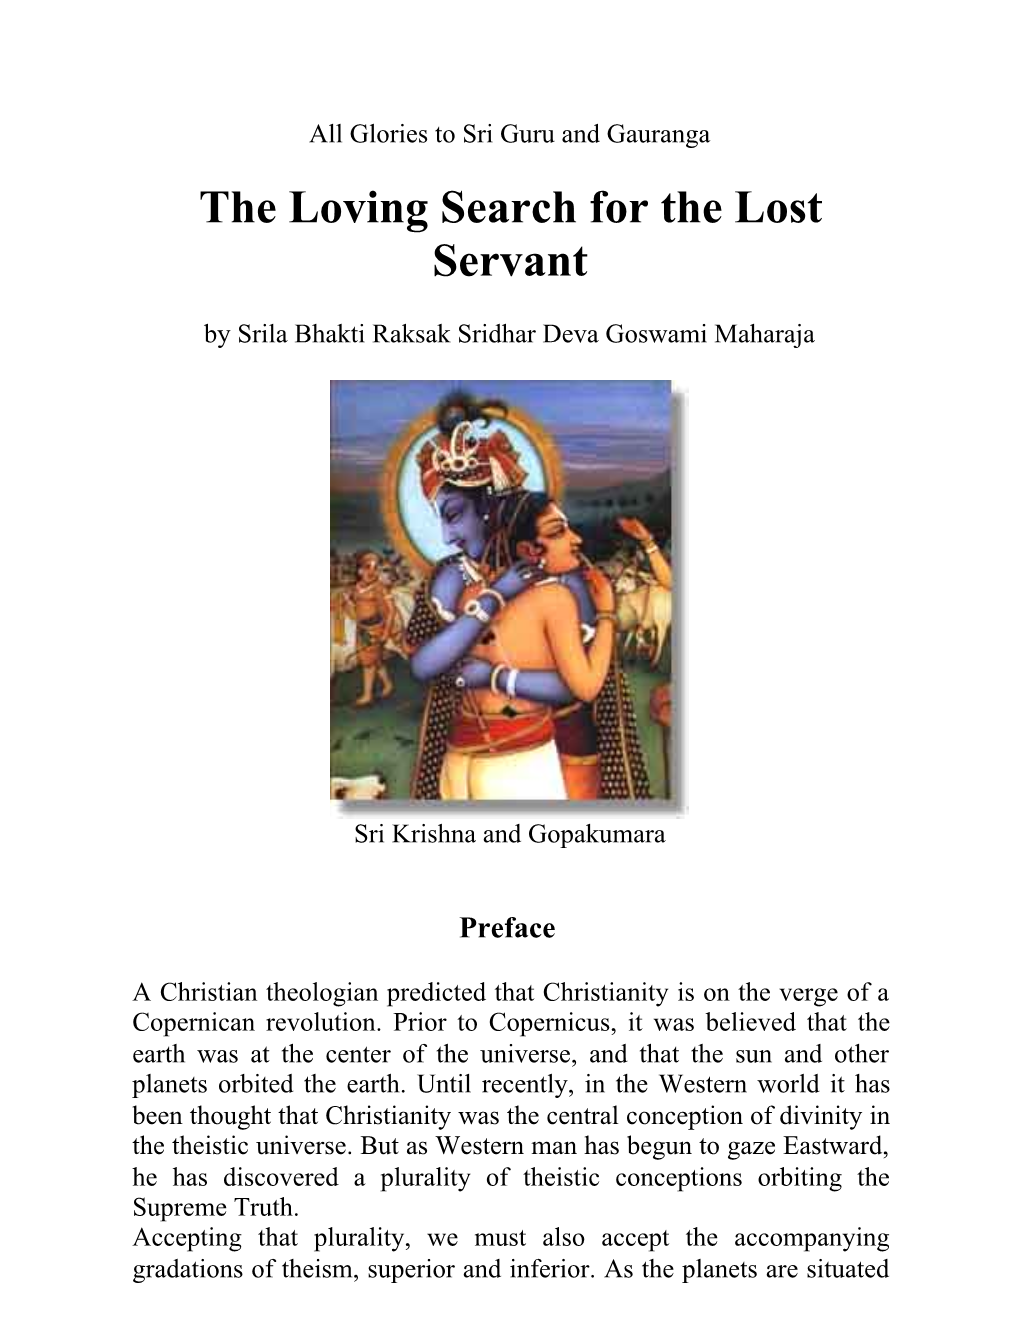 The Loving Search for the Lost Servant